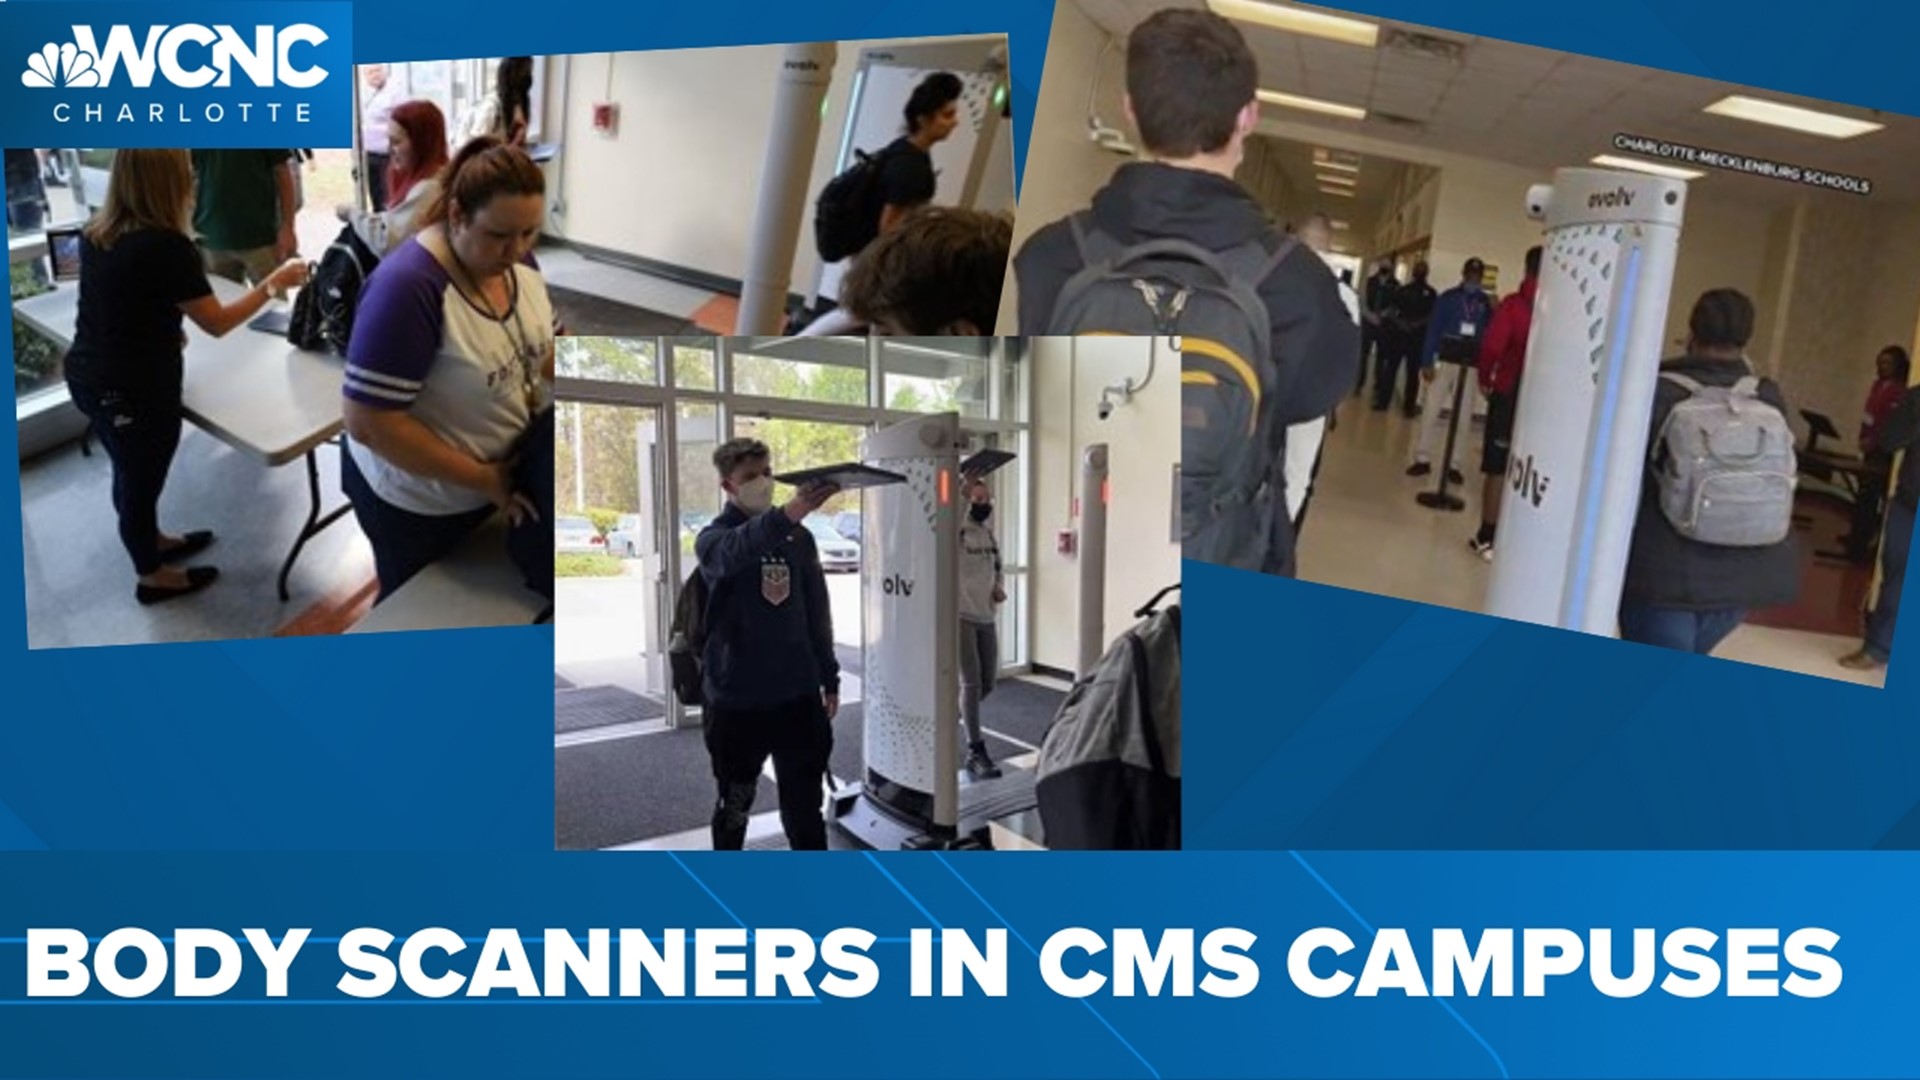 CMS says there's proof the scanner program is going well, but there are complaints.